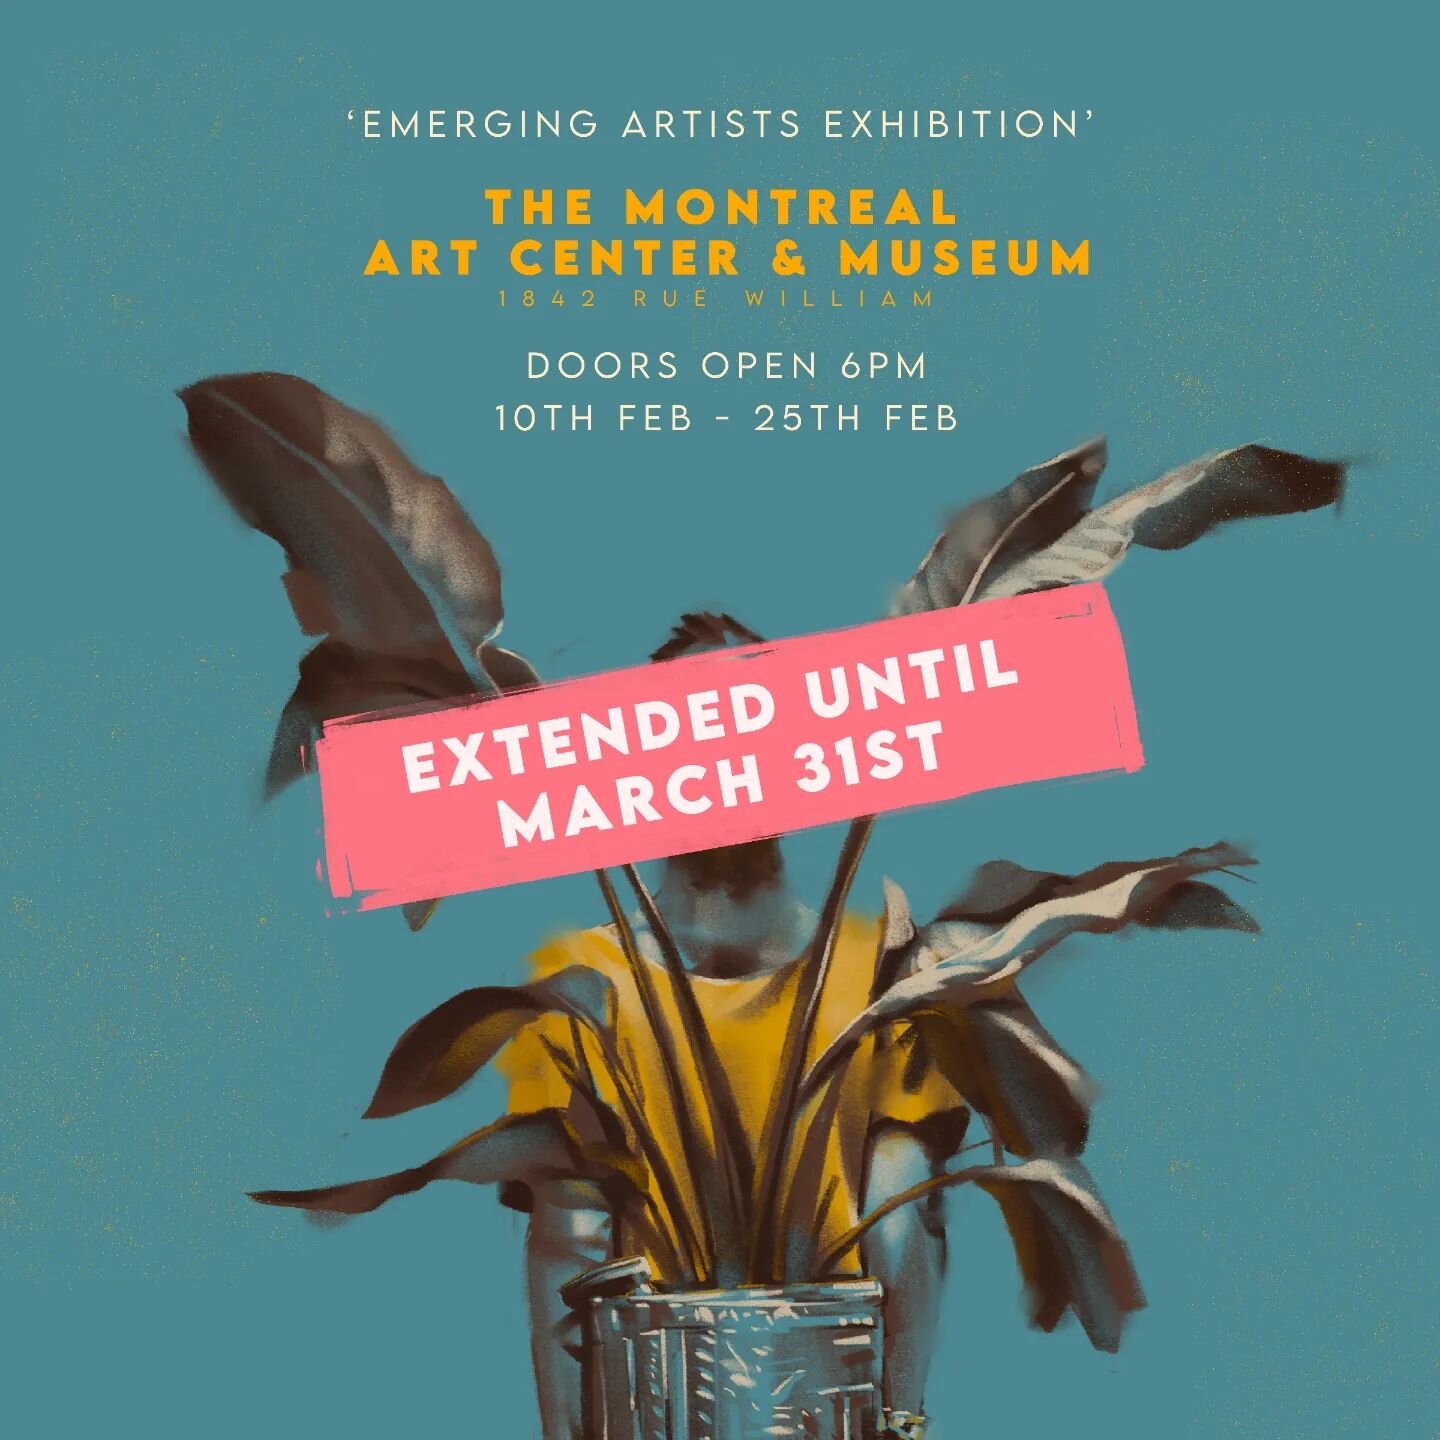 Apparently the @mtlartcenter 'Emerging Artists' exhibition received such a warm reception, they have decided to extend it for another month!

Thank you to everyone who came to the vernissage. You specifically made it such an impactful moment to spur 